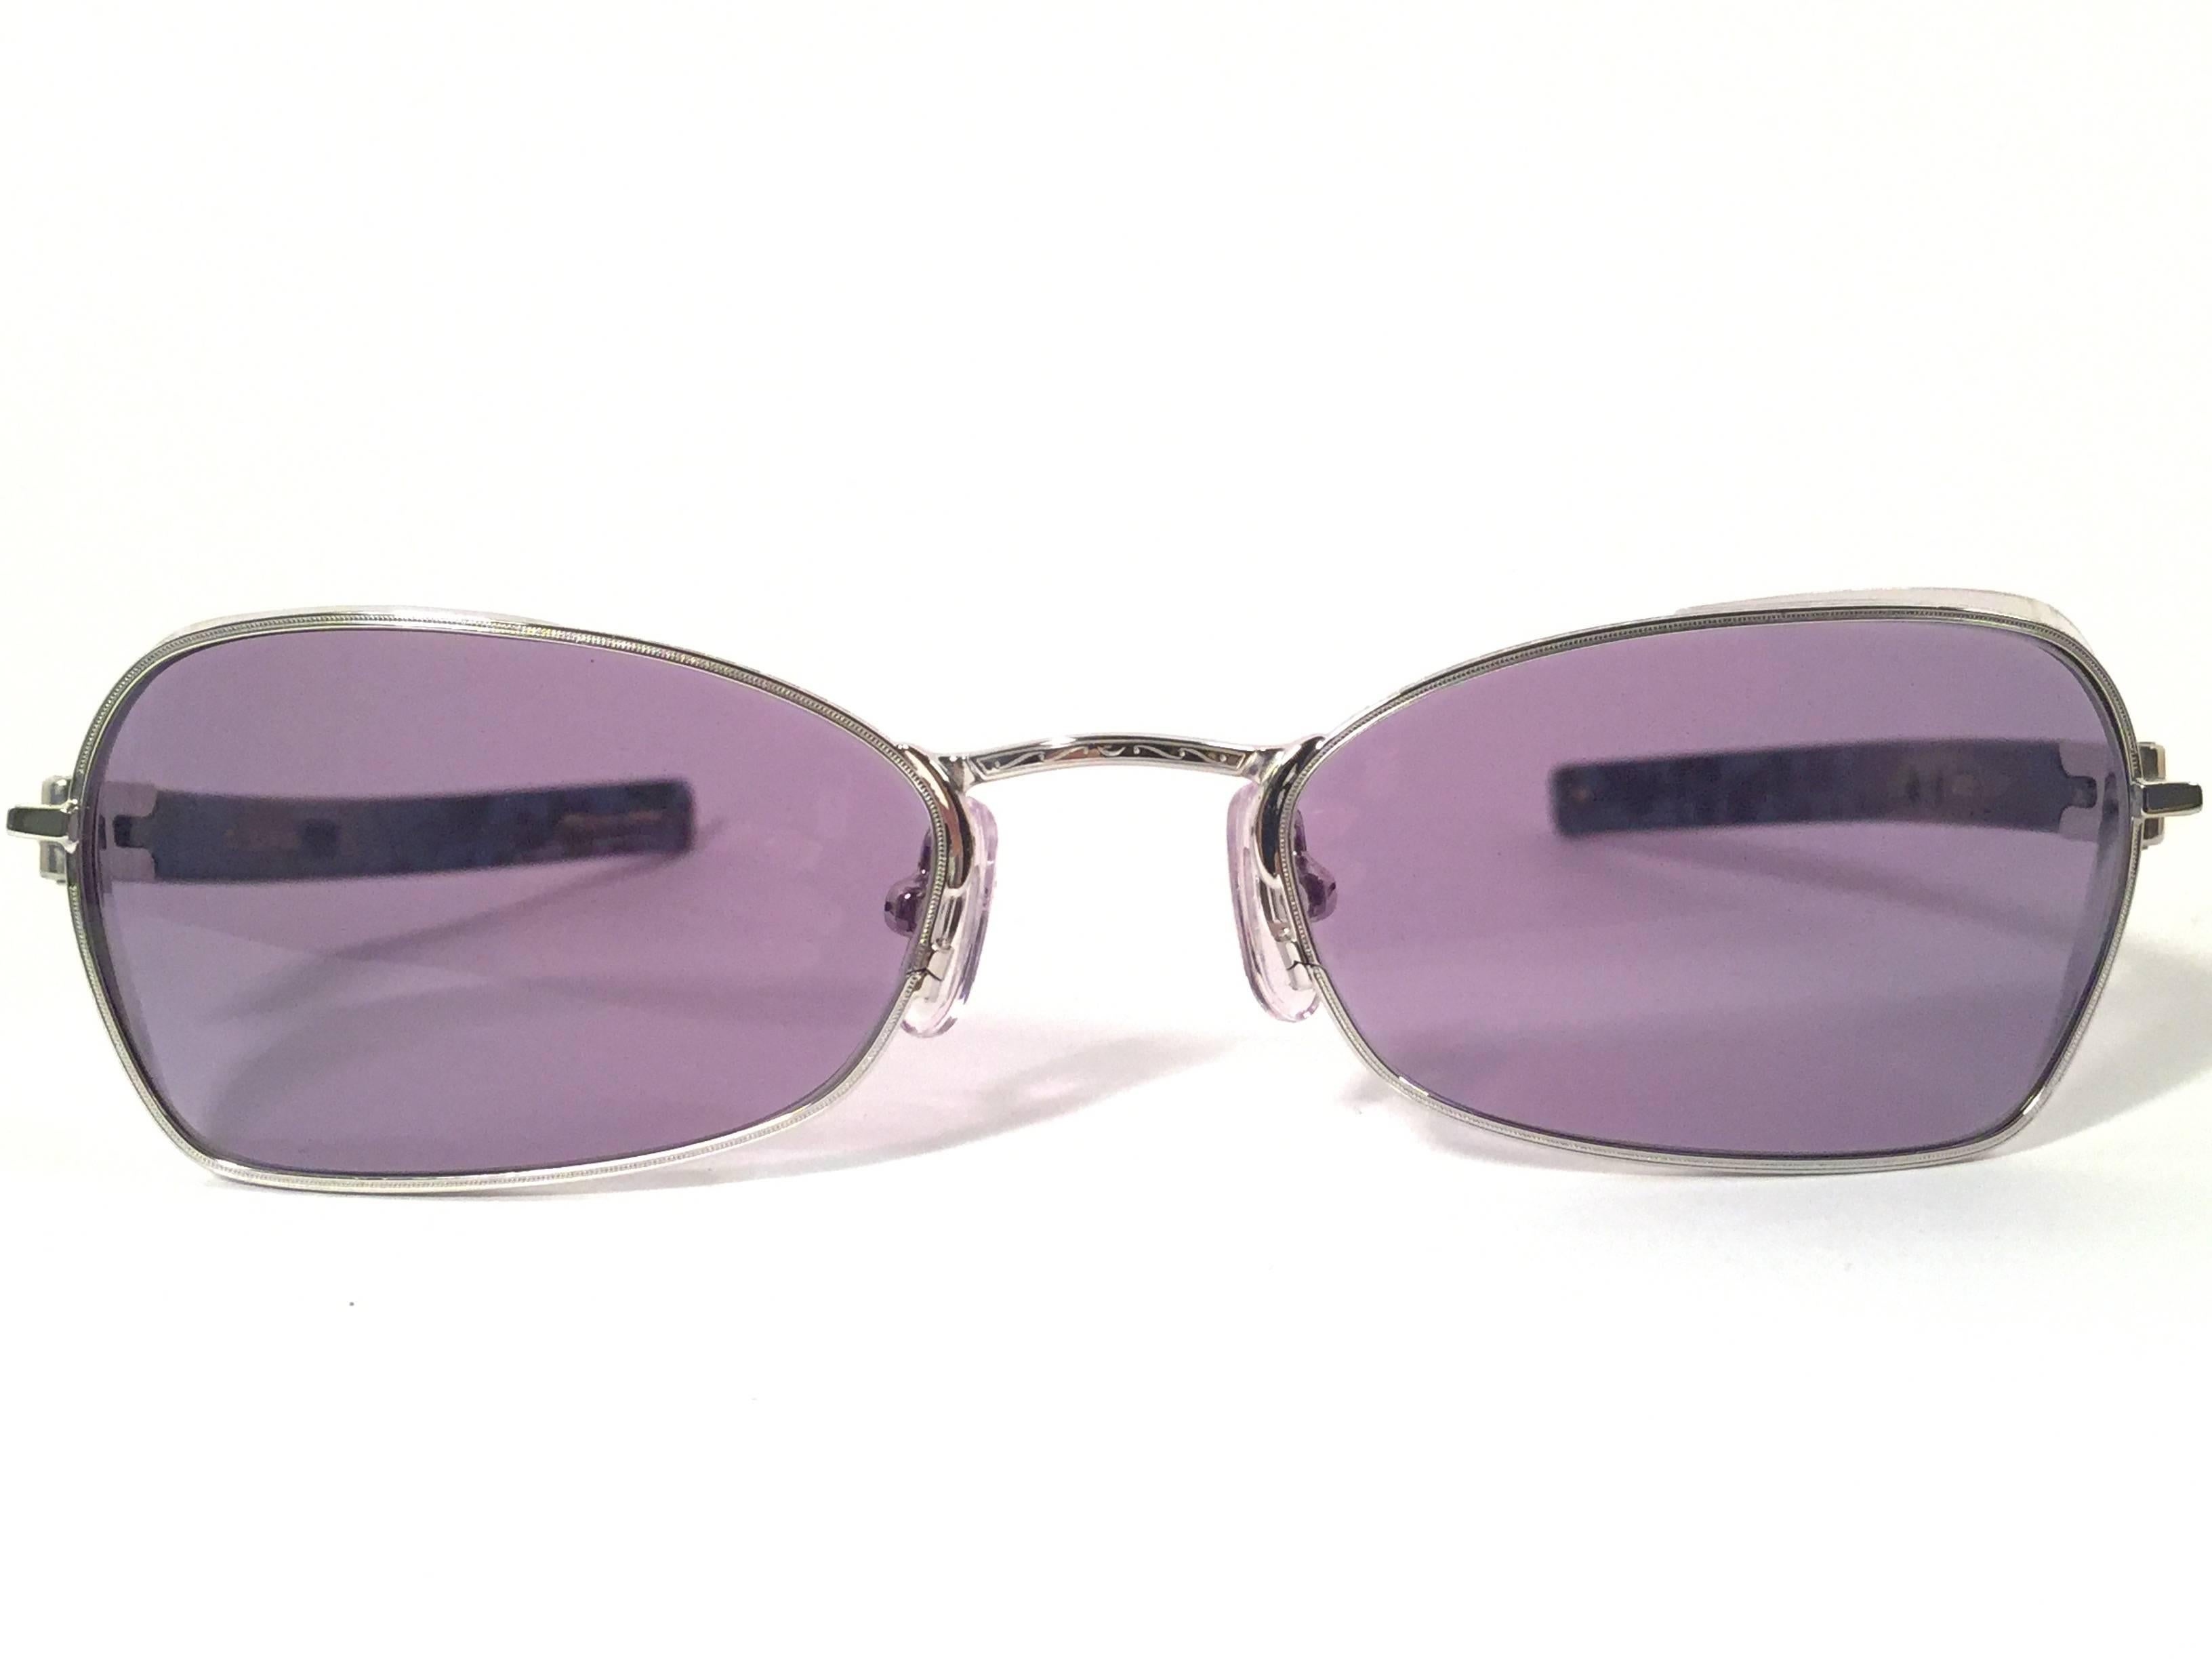 Cult brand Matsuda signed this ultra chic pair of Titanium with translucent blue marbled temples sunglasses. 

Spotless smoke grey lenses.

Superior quality and design. 

MEASUREMENTS 


FRONT : 13 CMS 
LENS HEIGHT : 3 CMS
LENS WIDTH : 5 CMS